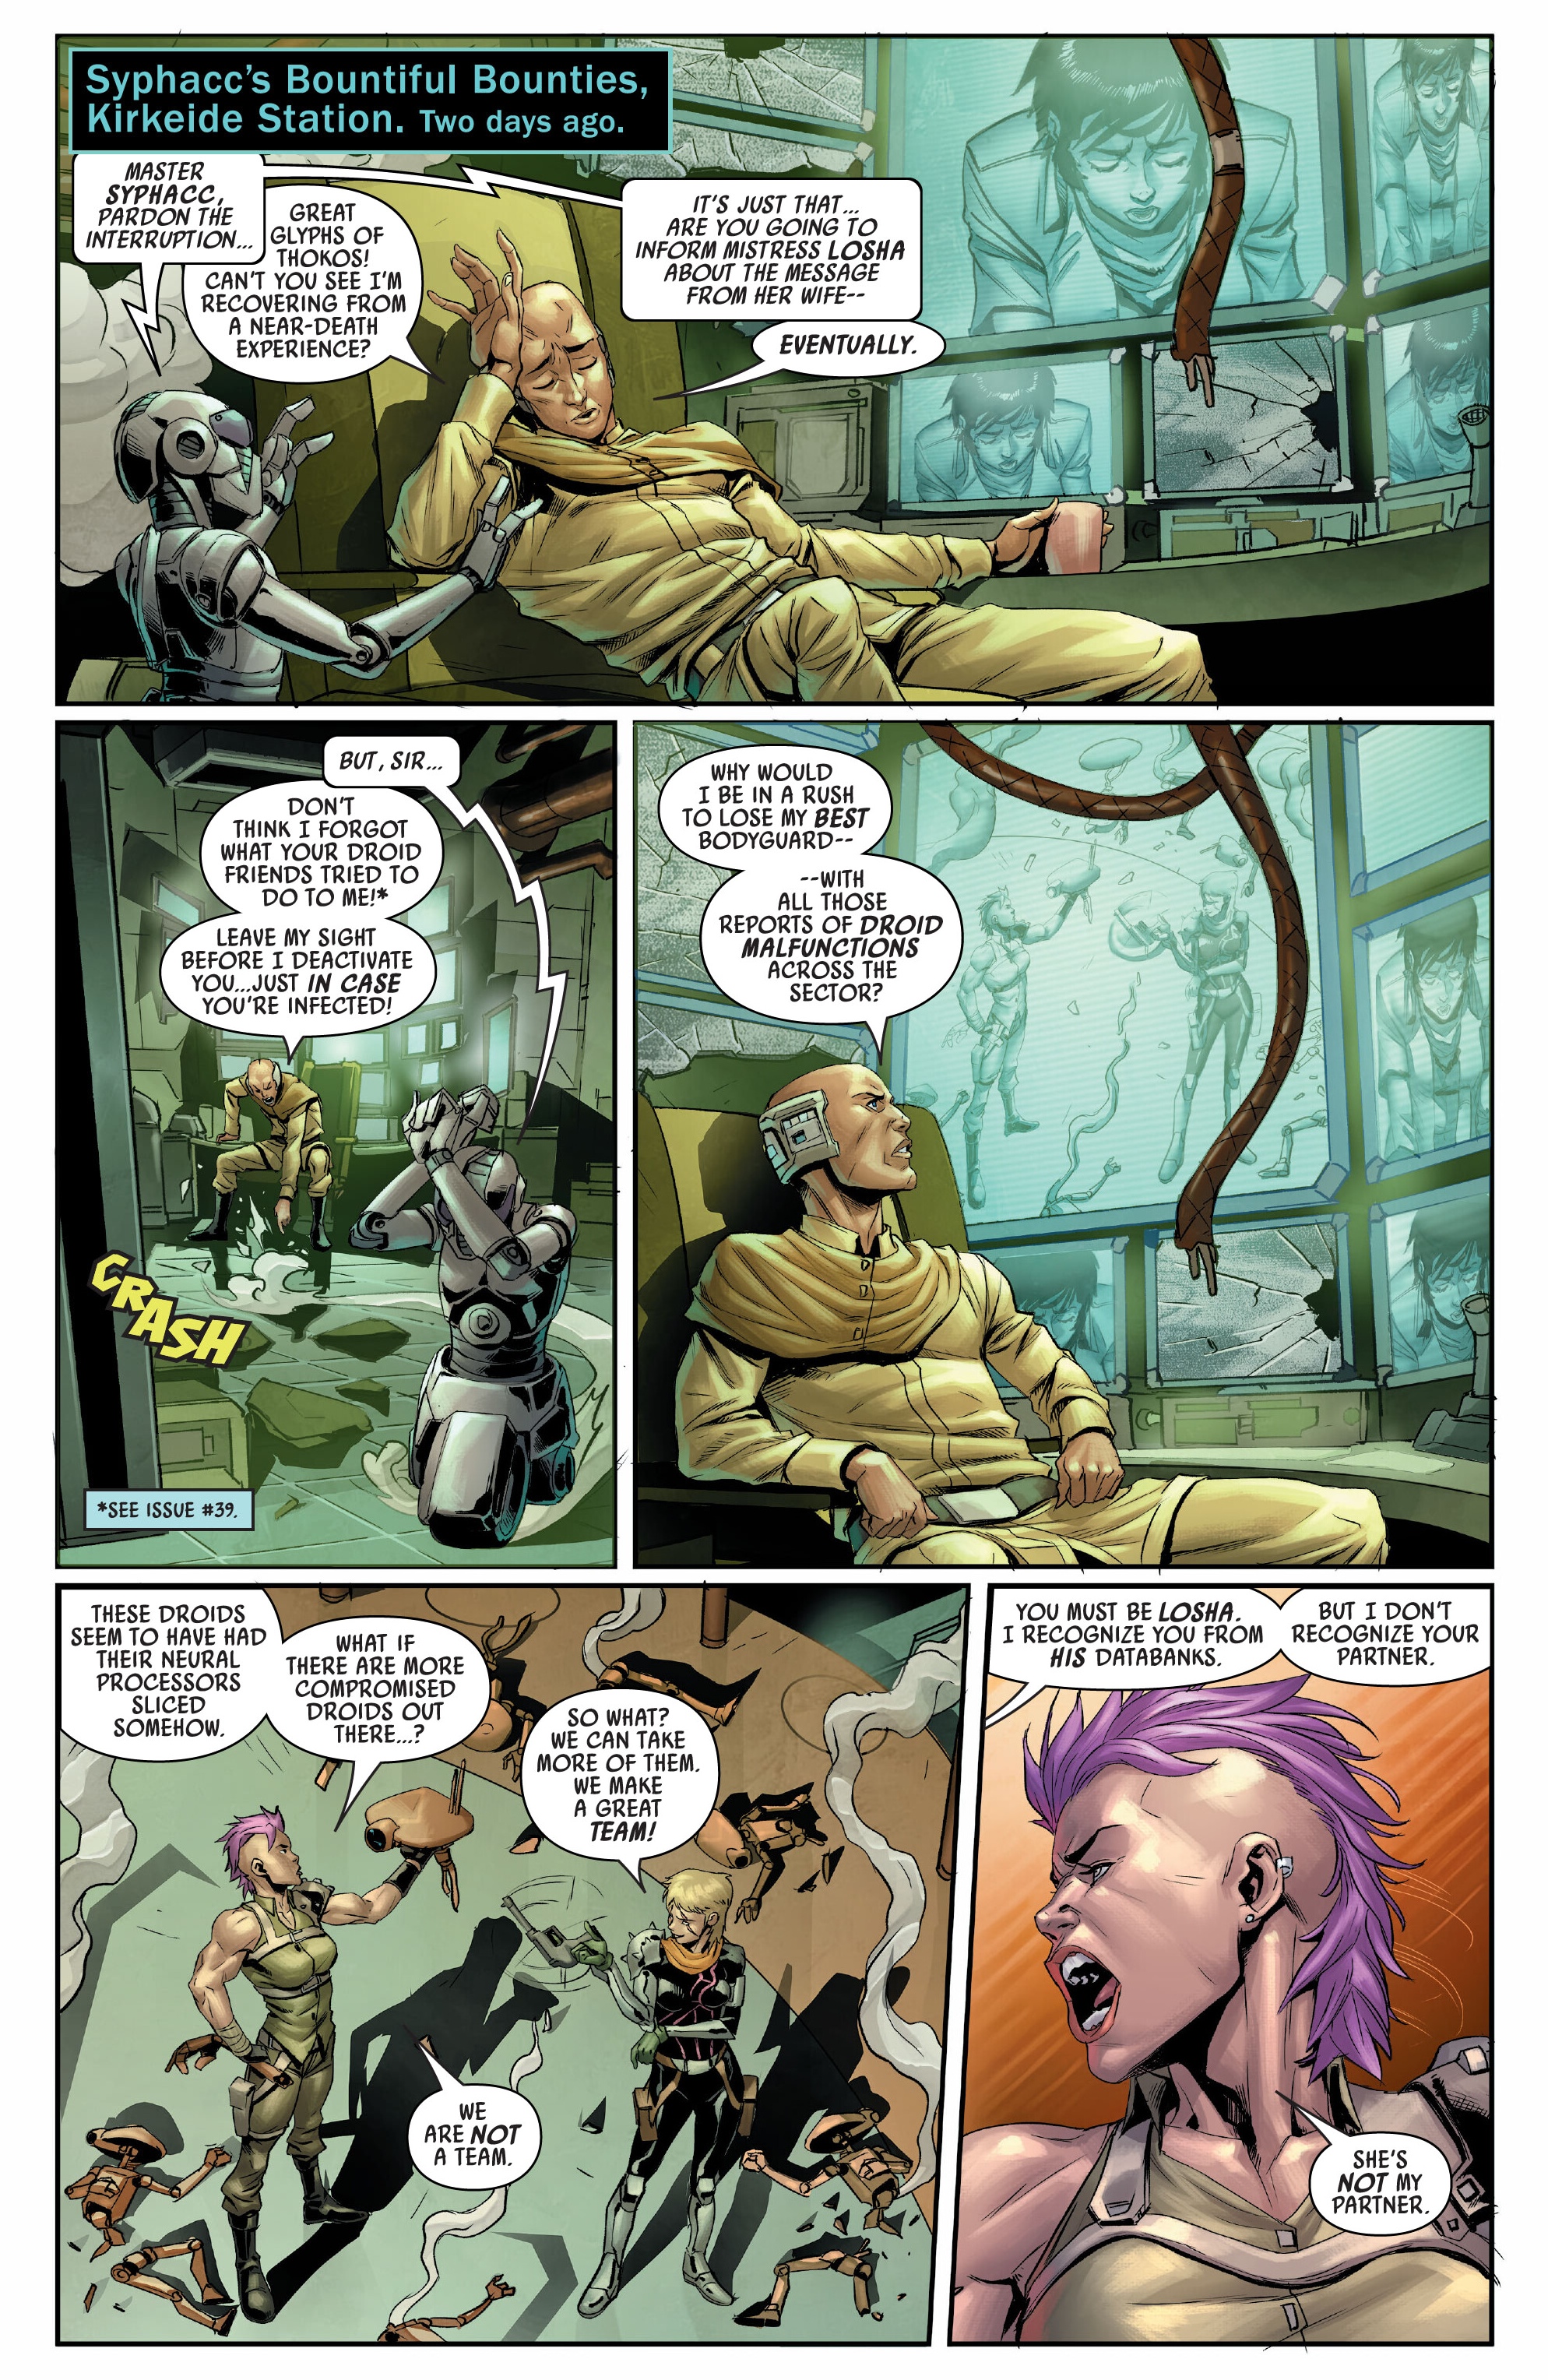 Star Wars: Bounty Hunters (2020-): Chapter 41 - Page 3